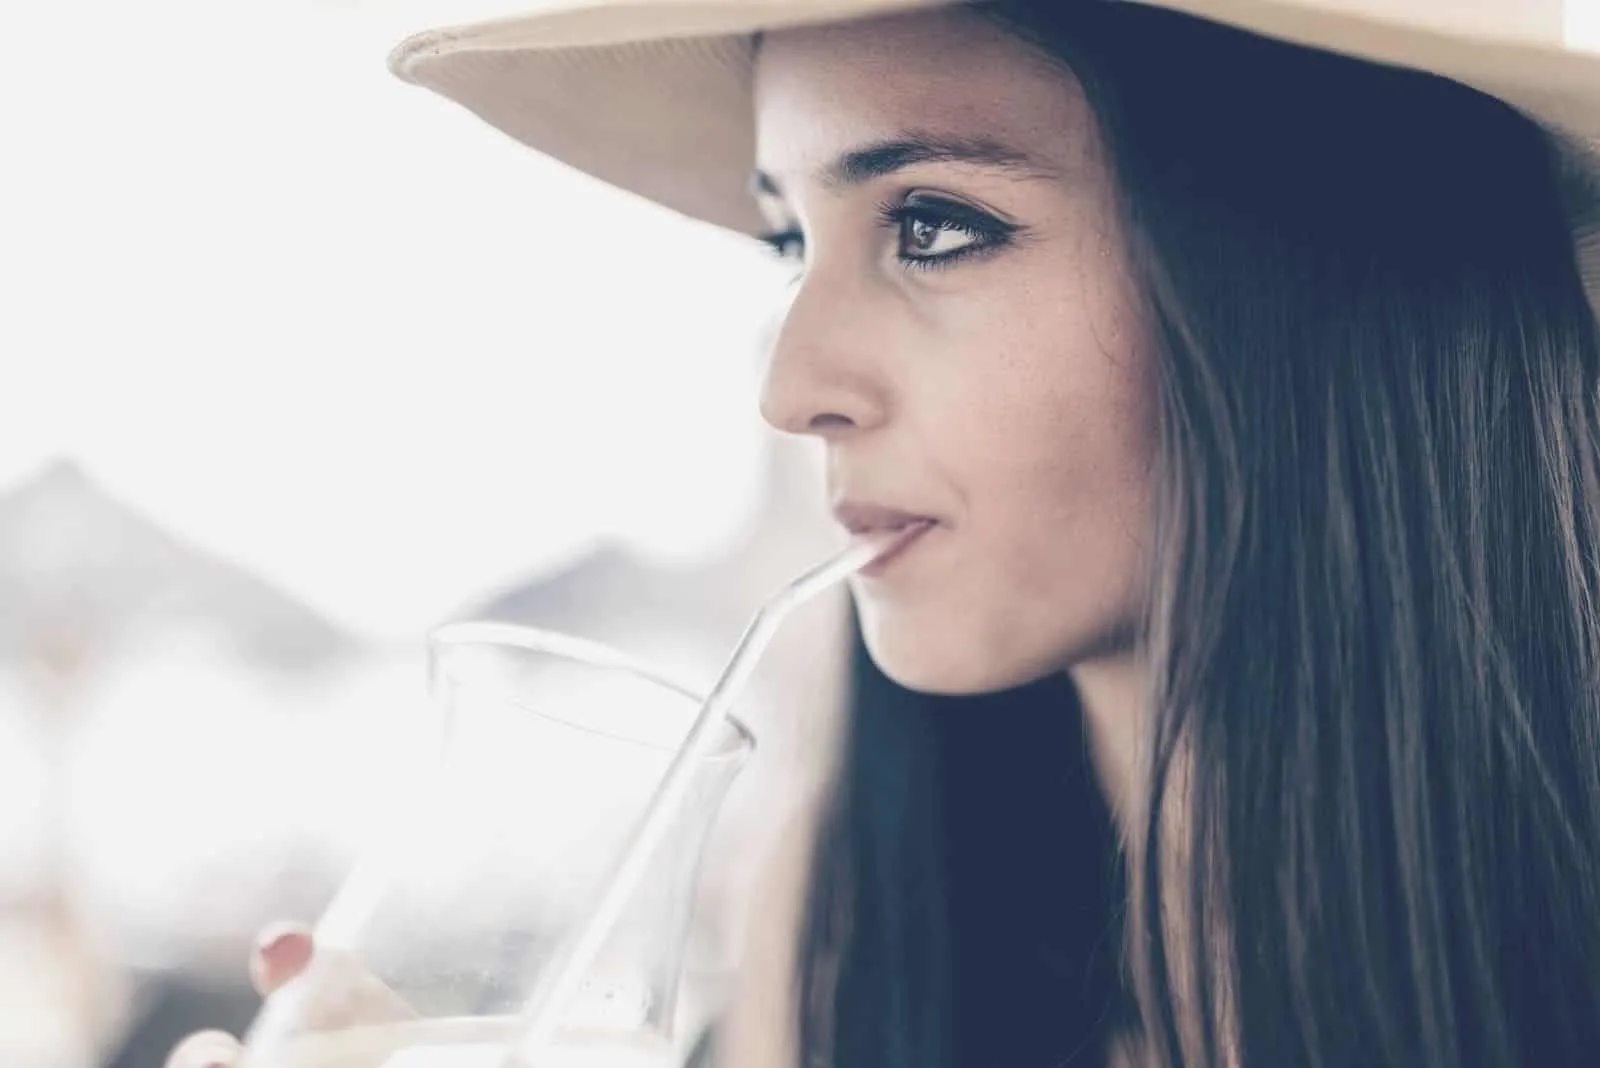 pensive woman drinking beverage in sideview close up photo wearing a hat 